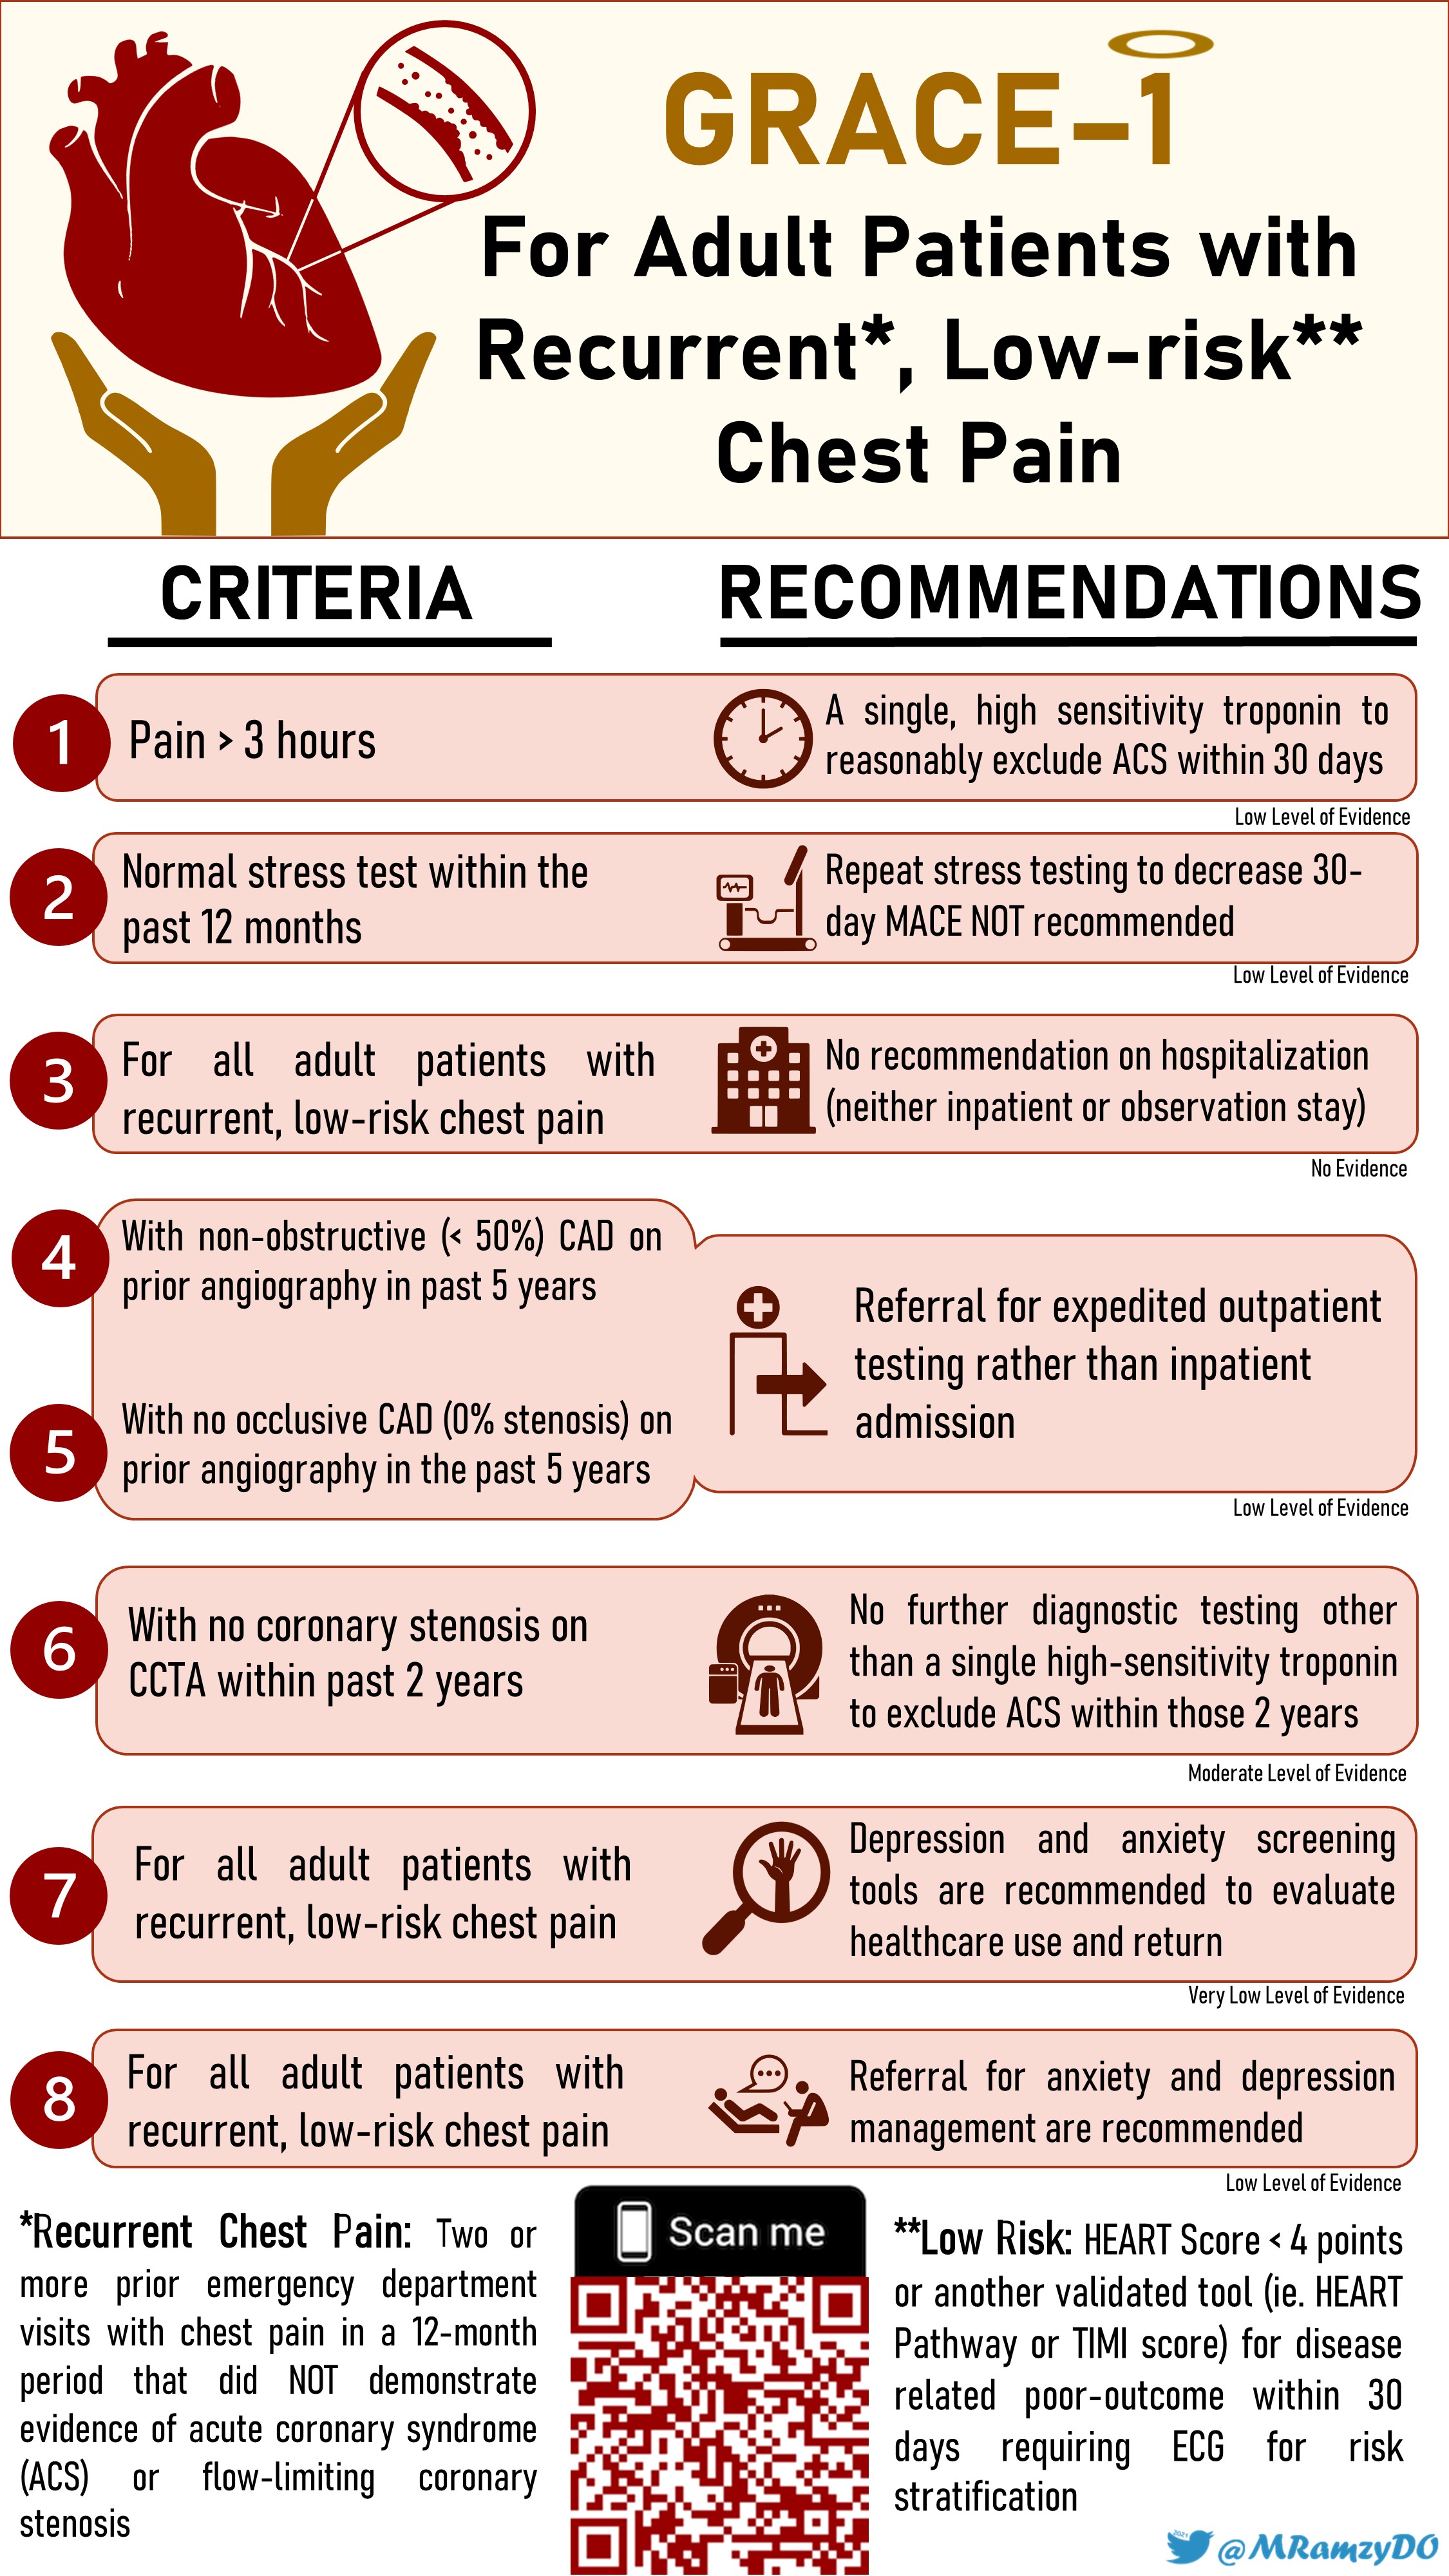 GRACE-1 Guidelines Infographic Final_Ramzy